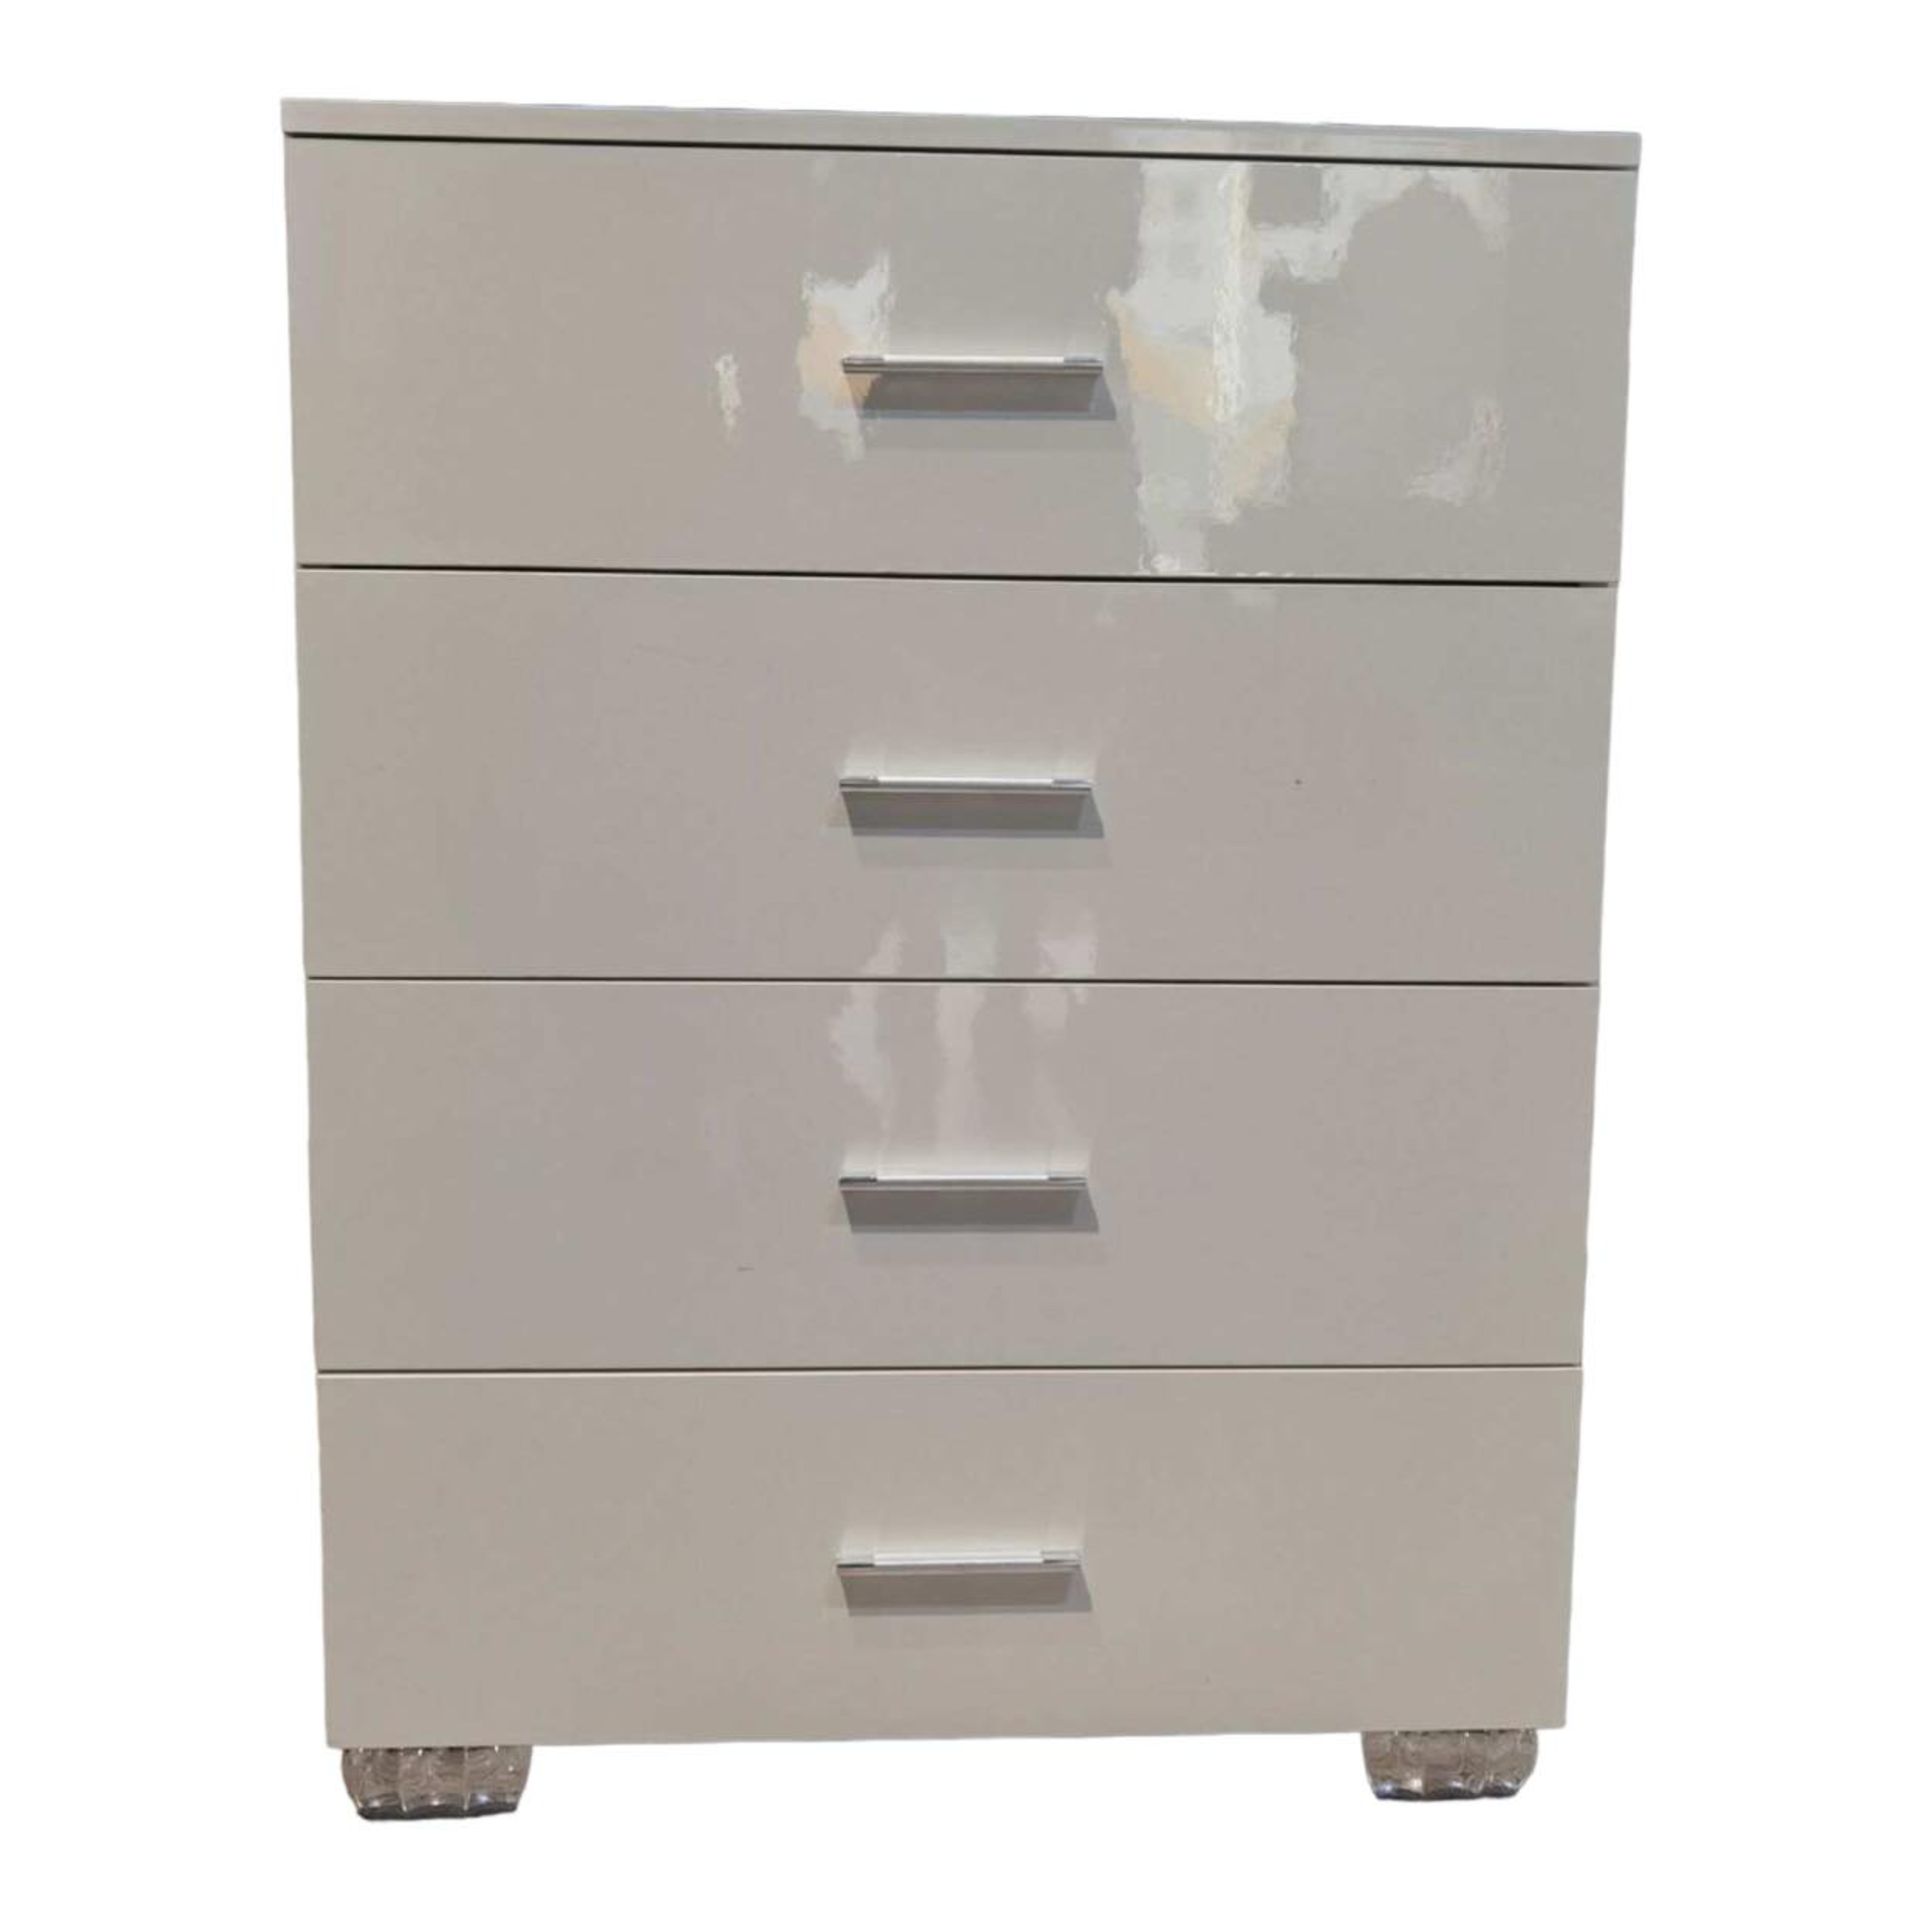 BRAND NEW CHEST OF DRAWERS HIGH GLOSS , TOP, SIDES AND FRONT